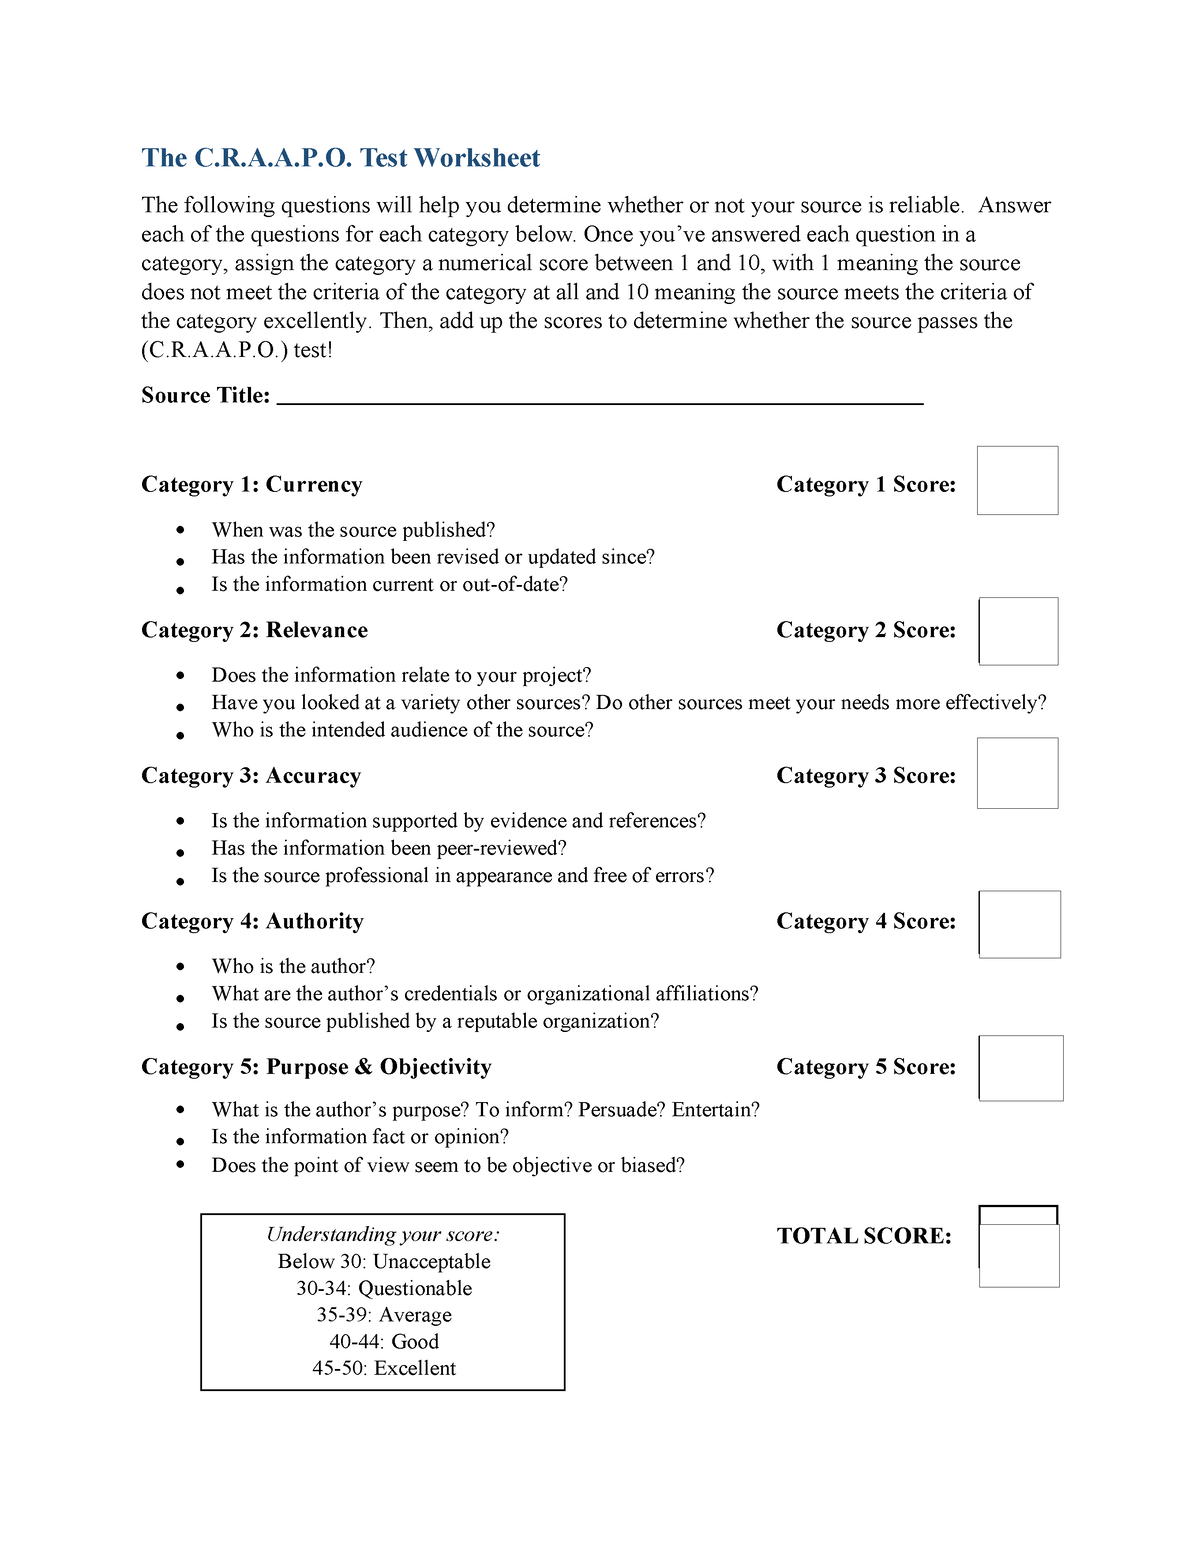 craapotest-the-c-r-a-a-p-test-worksheet-the-following-questions-will-help-you